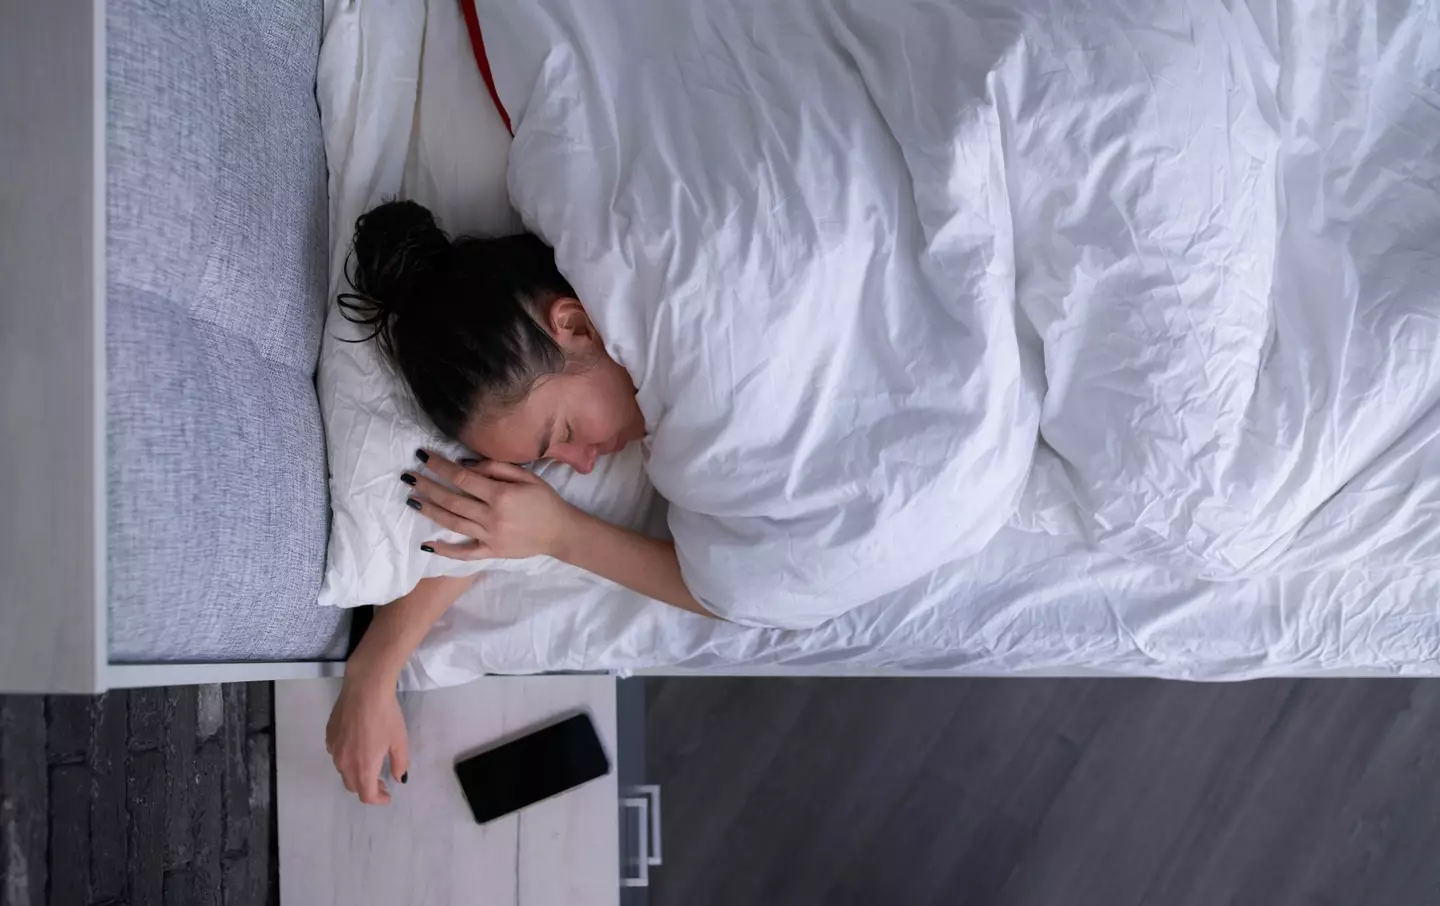 People have been oversleeping due to the iPhone glitch.